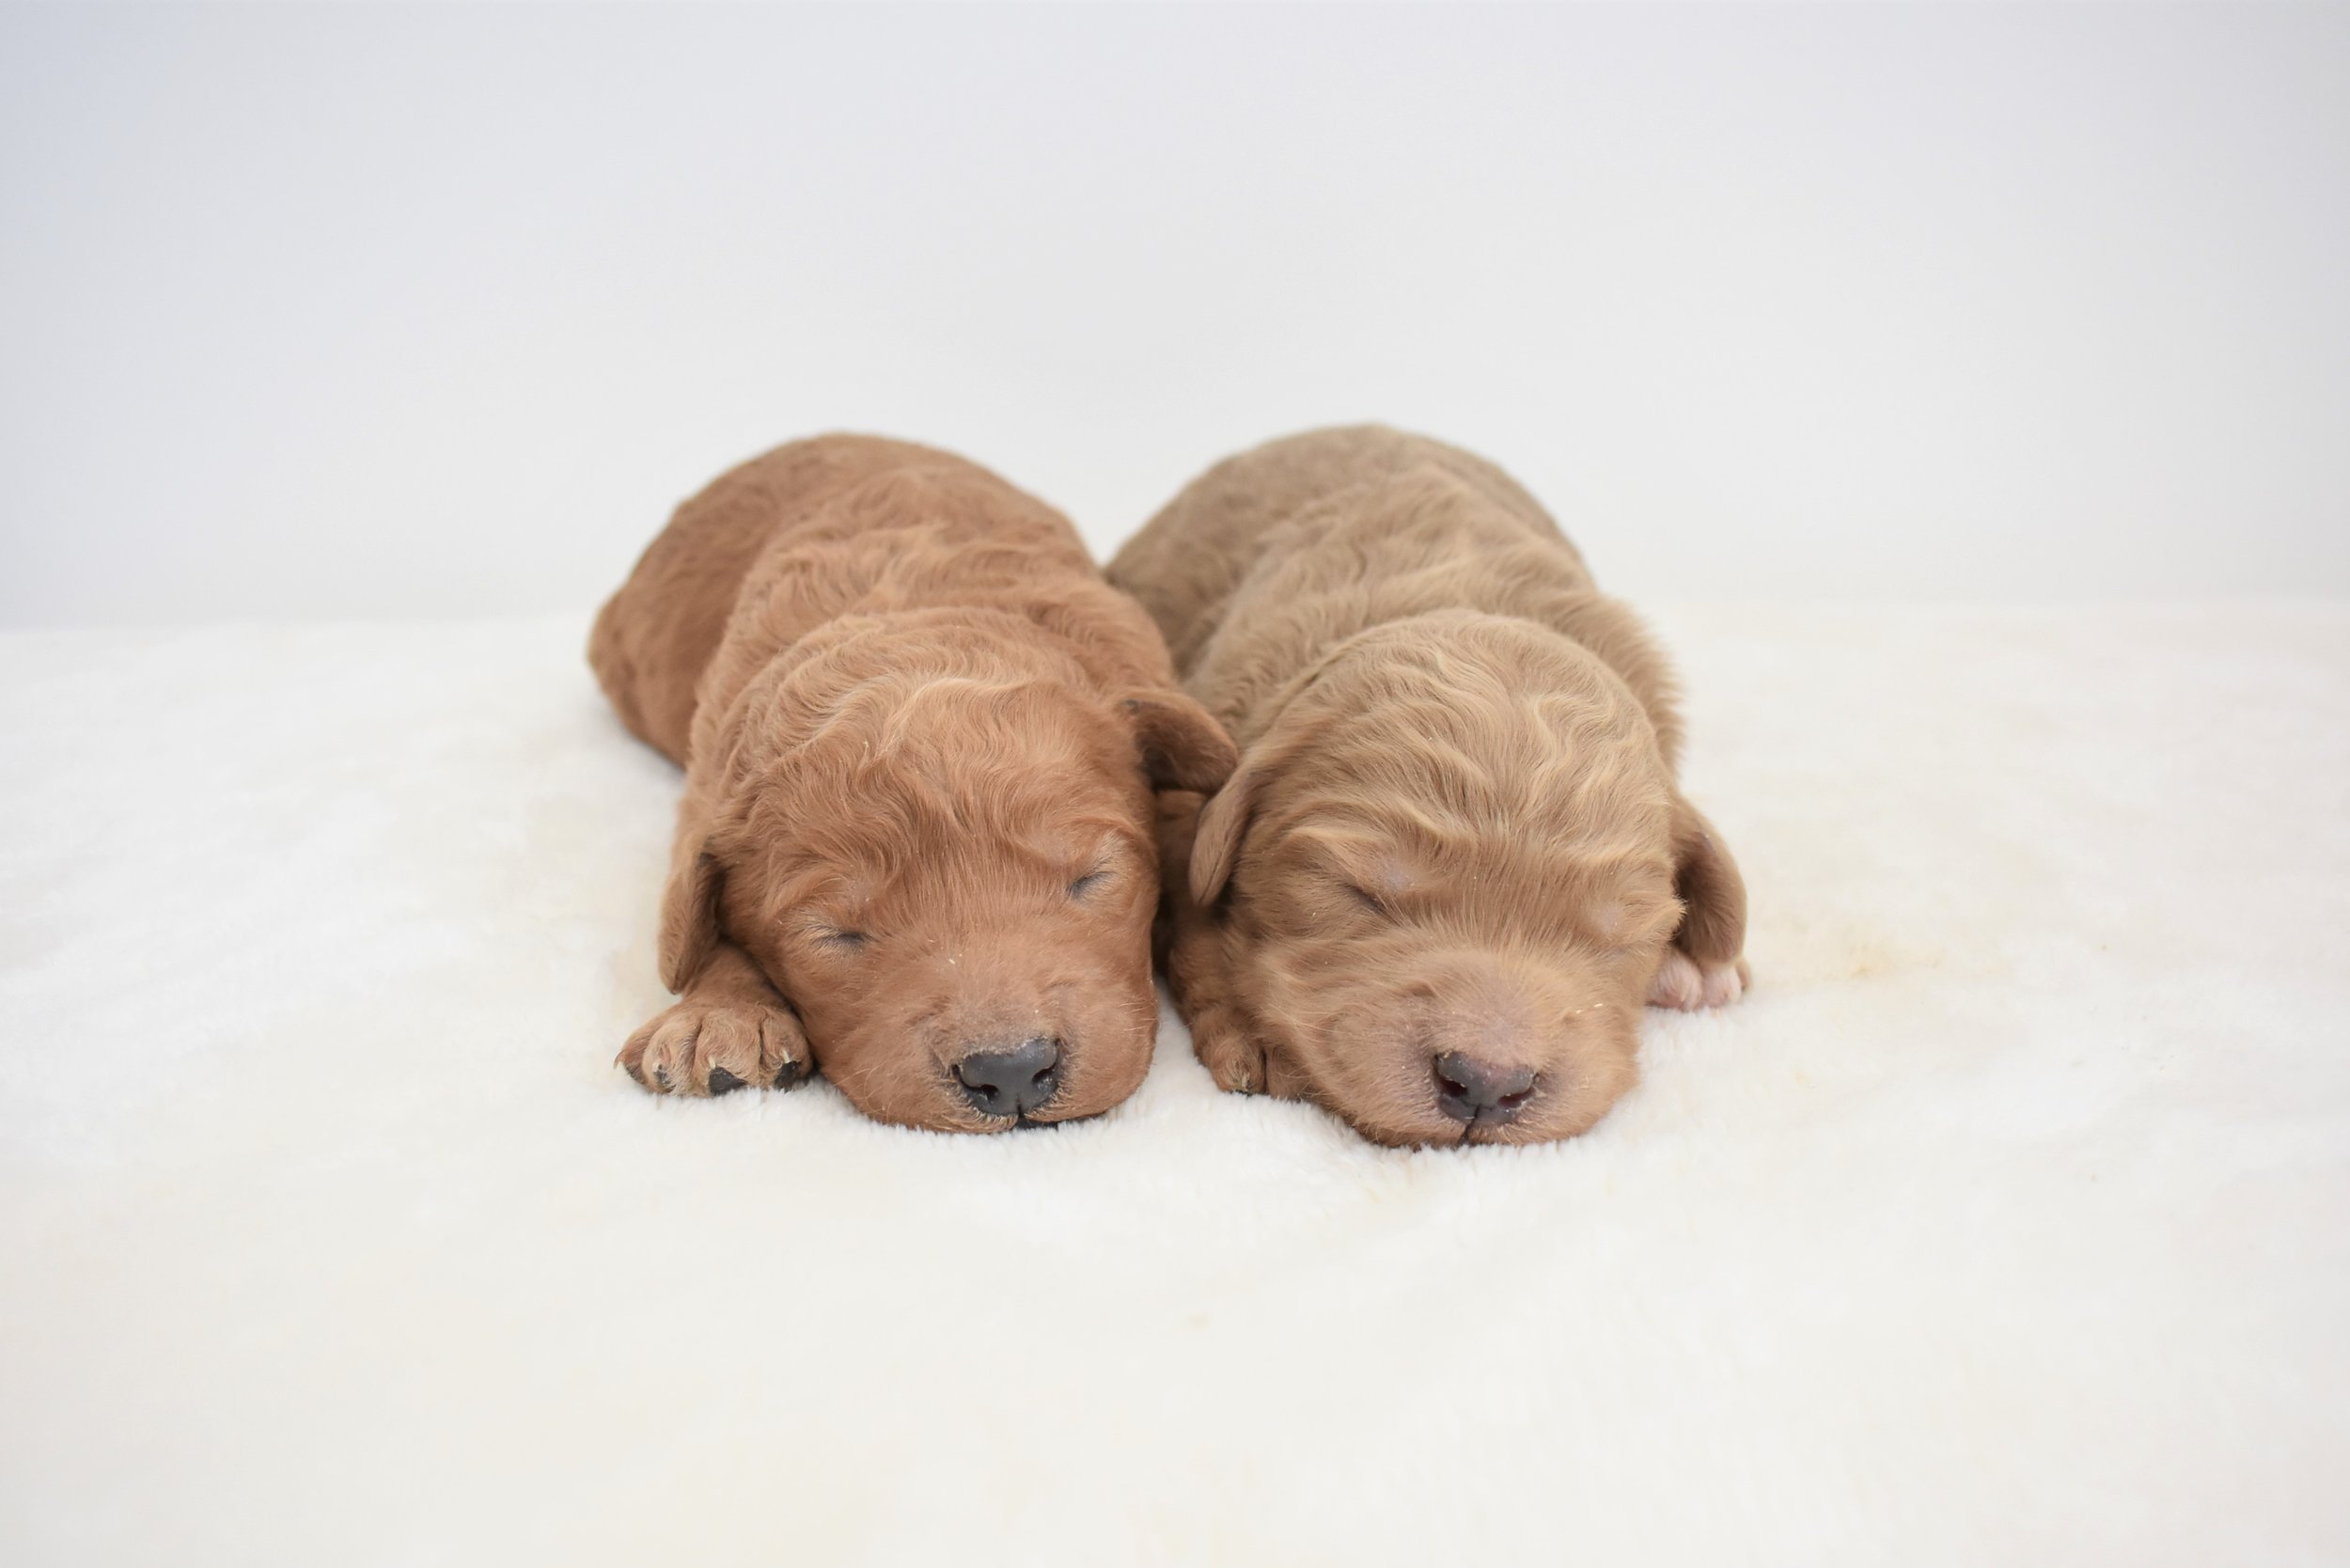  Two one week old copper colored Medium F1B Golden Doodle puppies near Waterloo Ontario.  